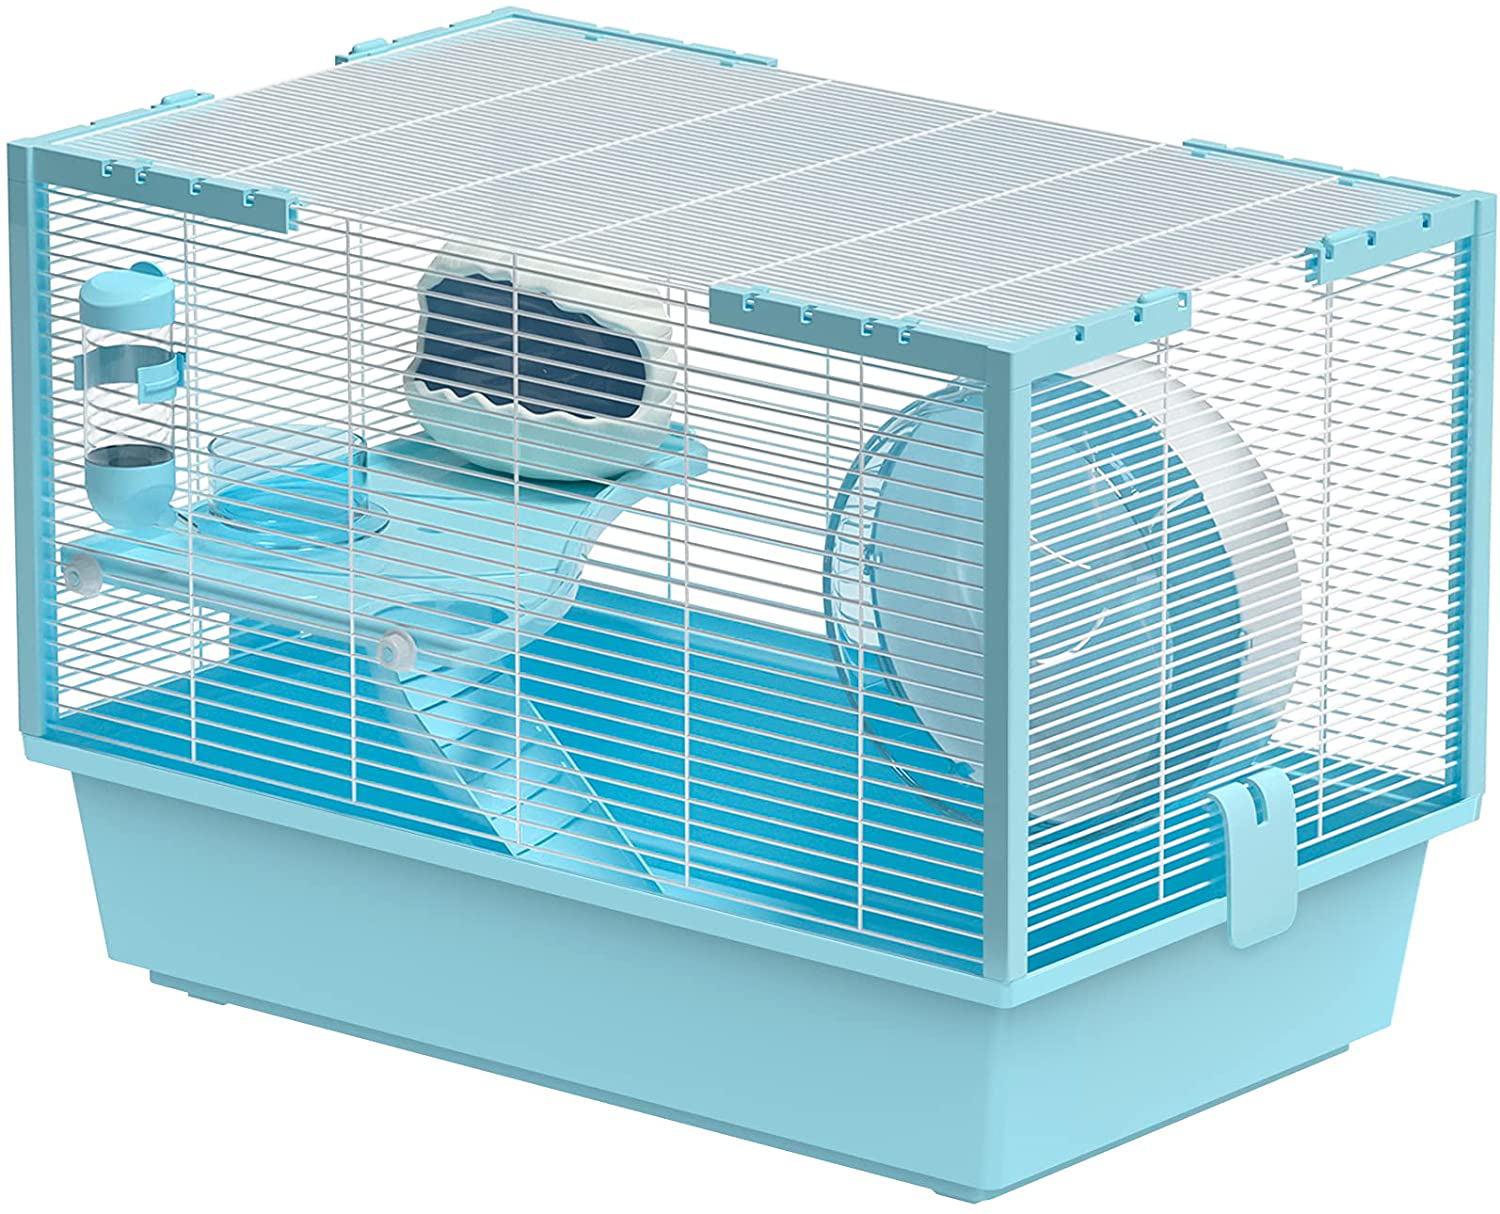 Large Hamster Cages and Habitats Small Animal Cage for Syrian Hamster ( Sky Blue) Animals & Pet Supplies > Pet Supplies > Small Animal Supplies > Small Animal Habitats & Cages Rolife   